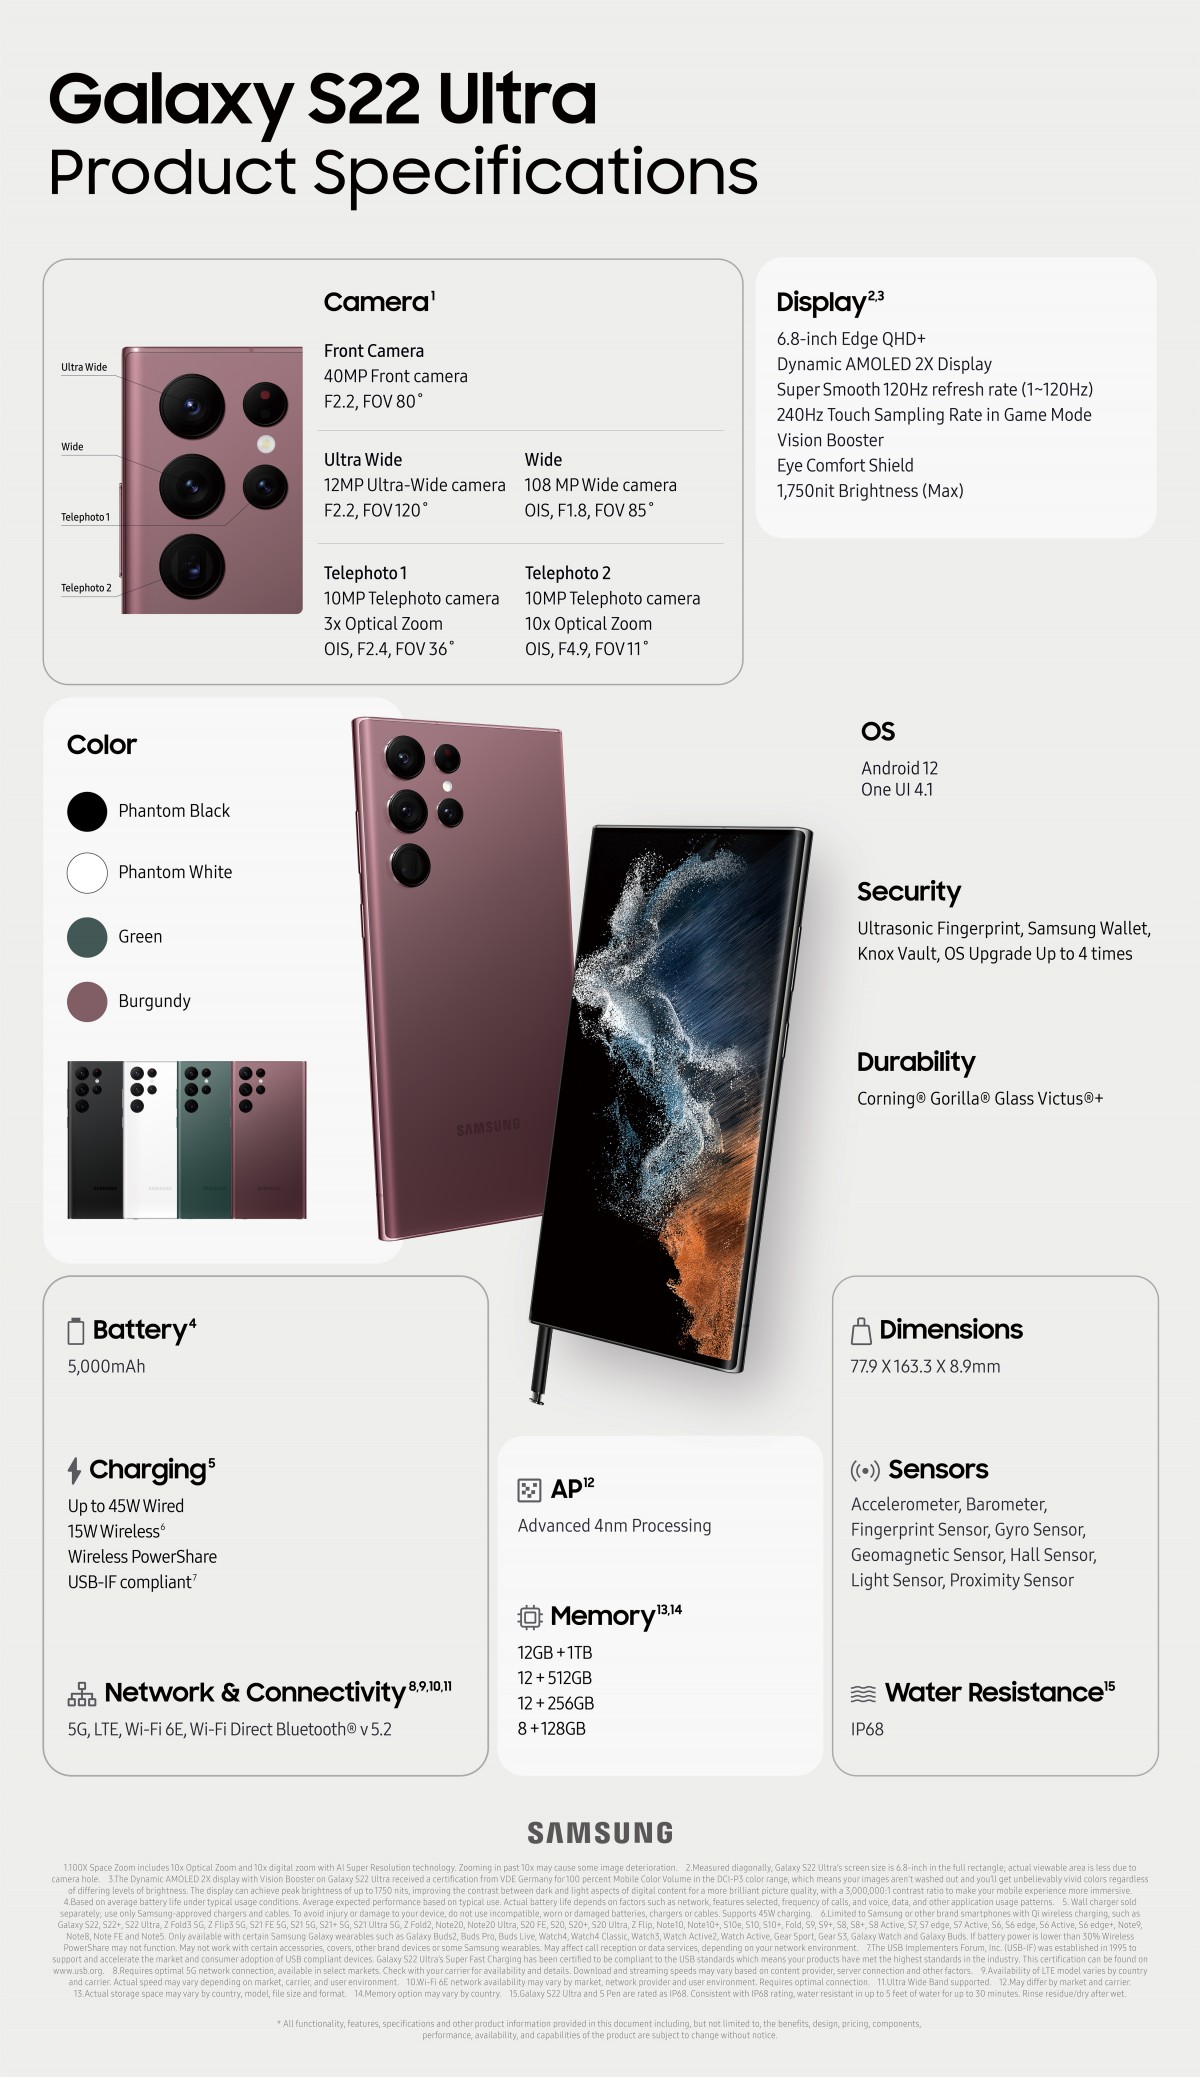 Samsung publishes specs infographics for the Galaxy S22 Ultra and Galaxy Tab S8 series